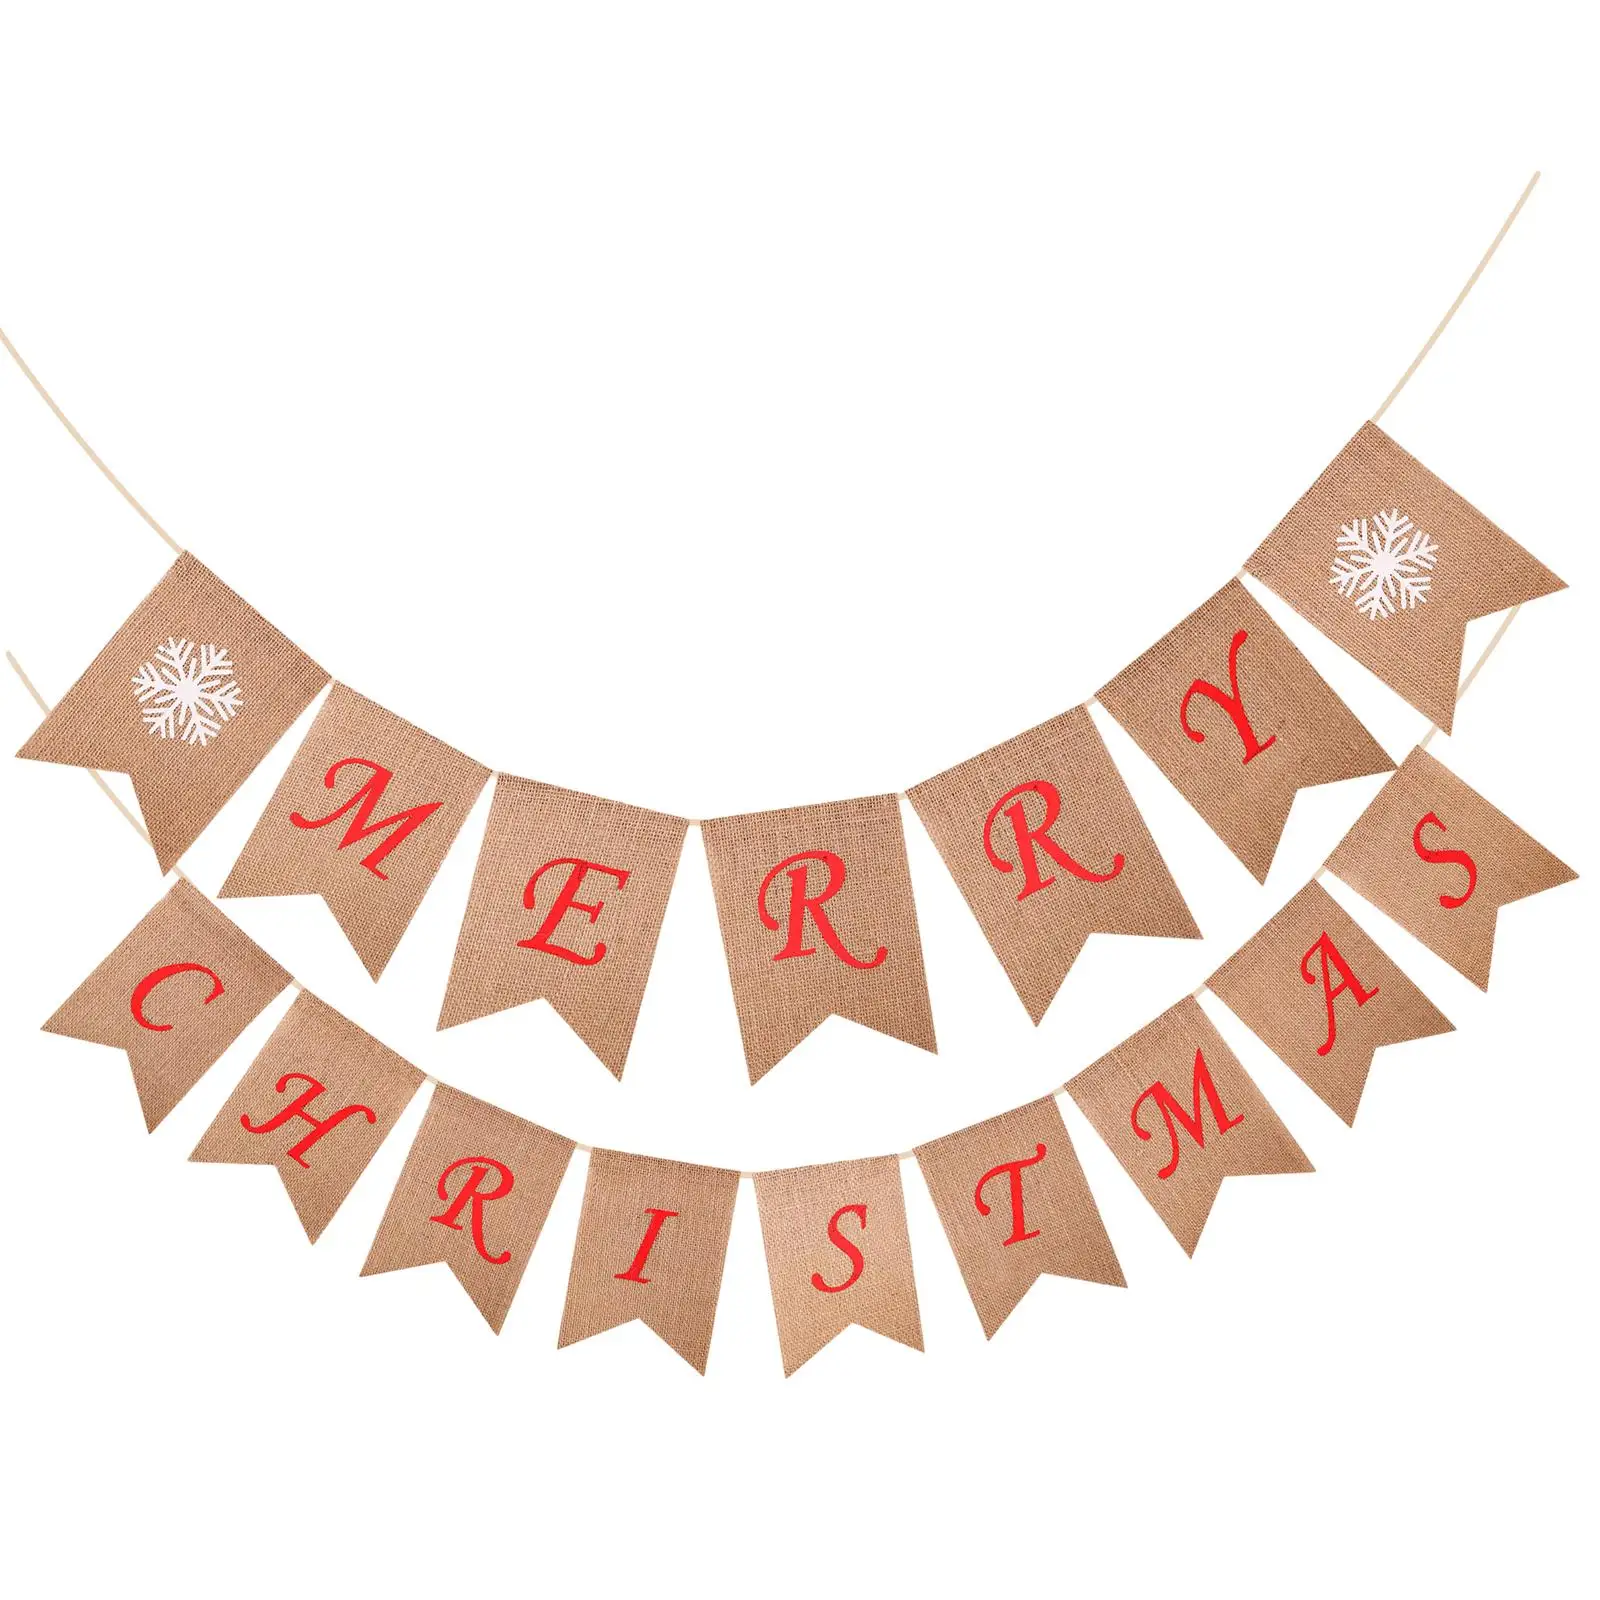 Merry Christmas Banner Props Christmas Decorations for Holiday Wedding Wall